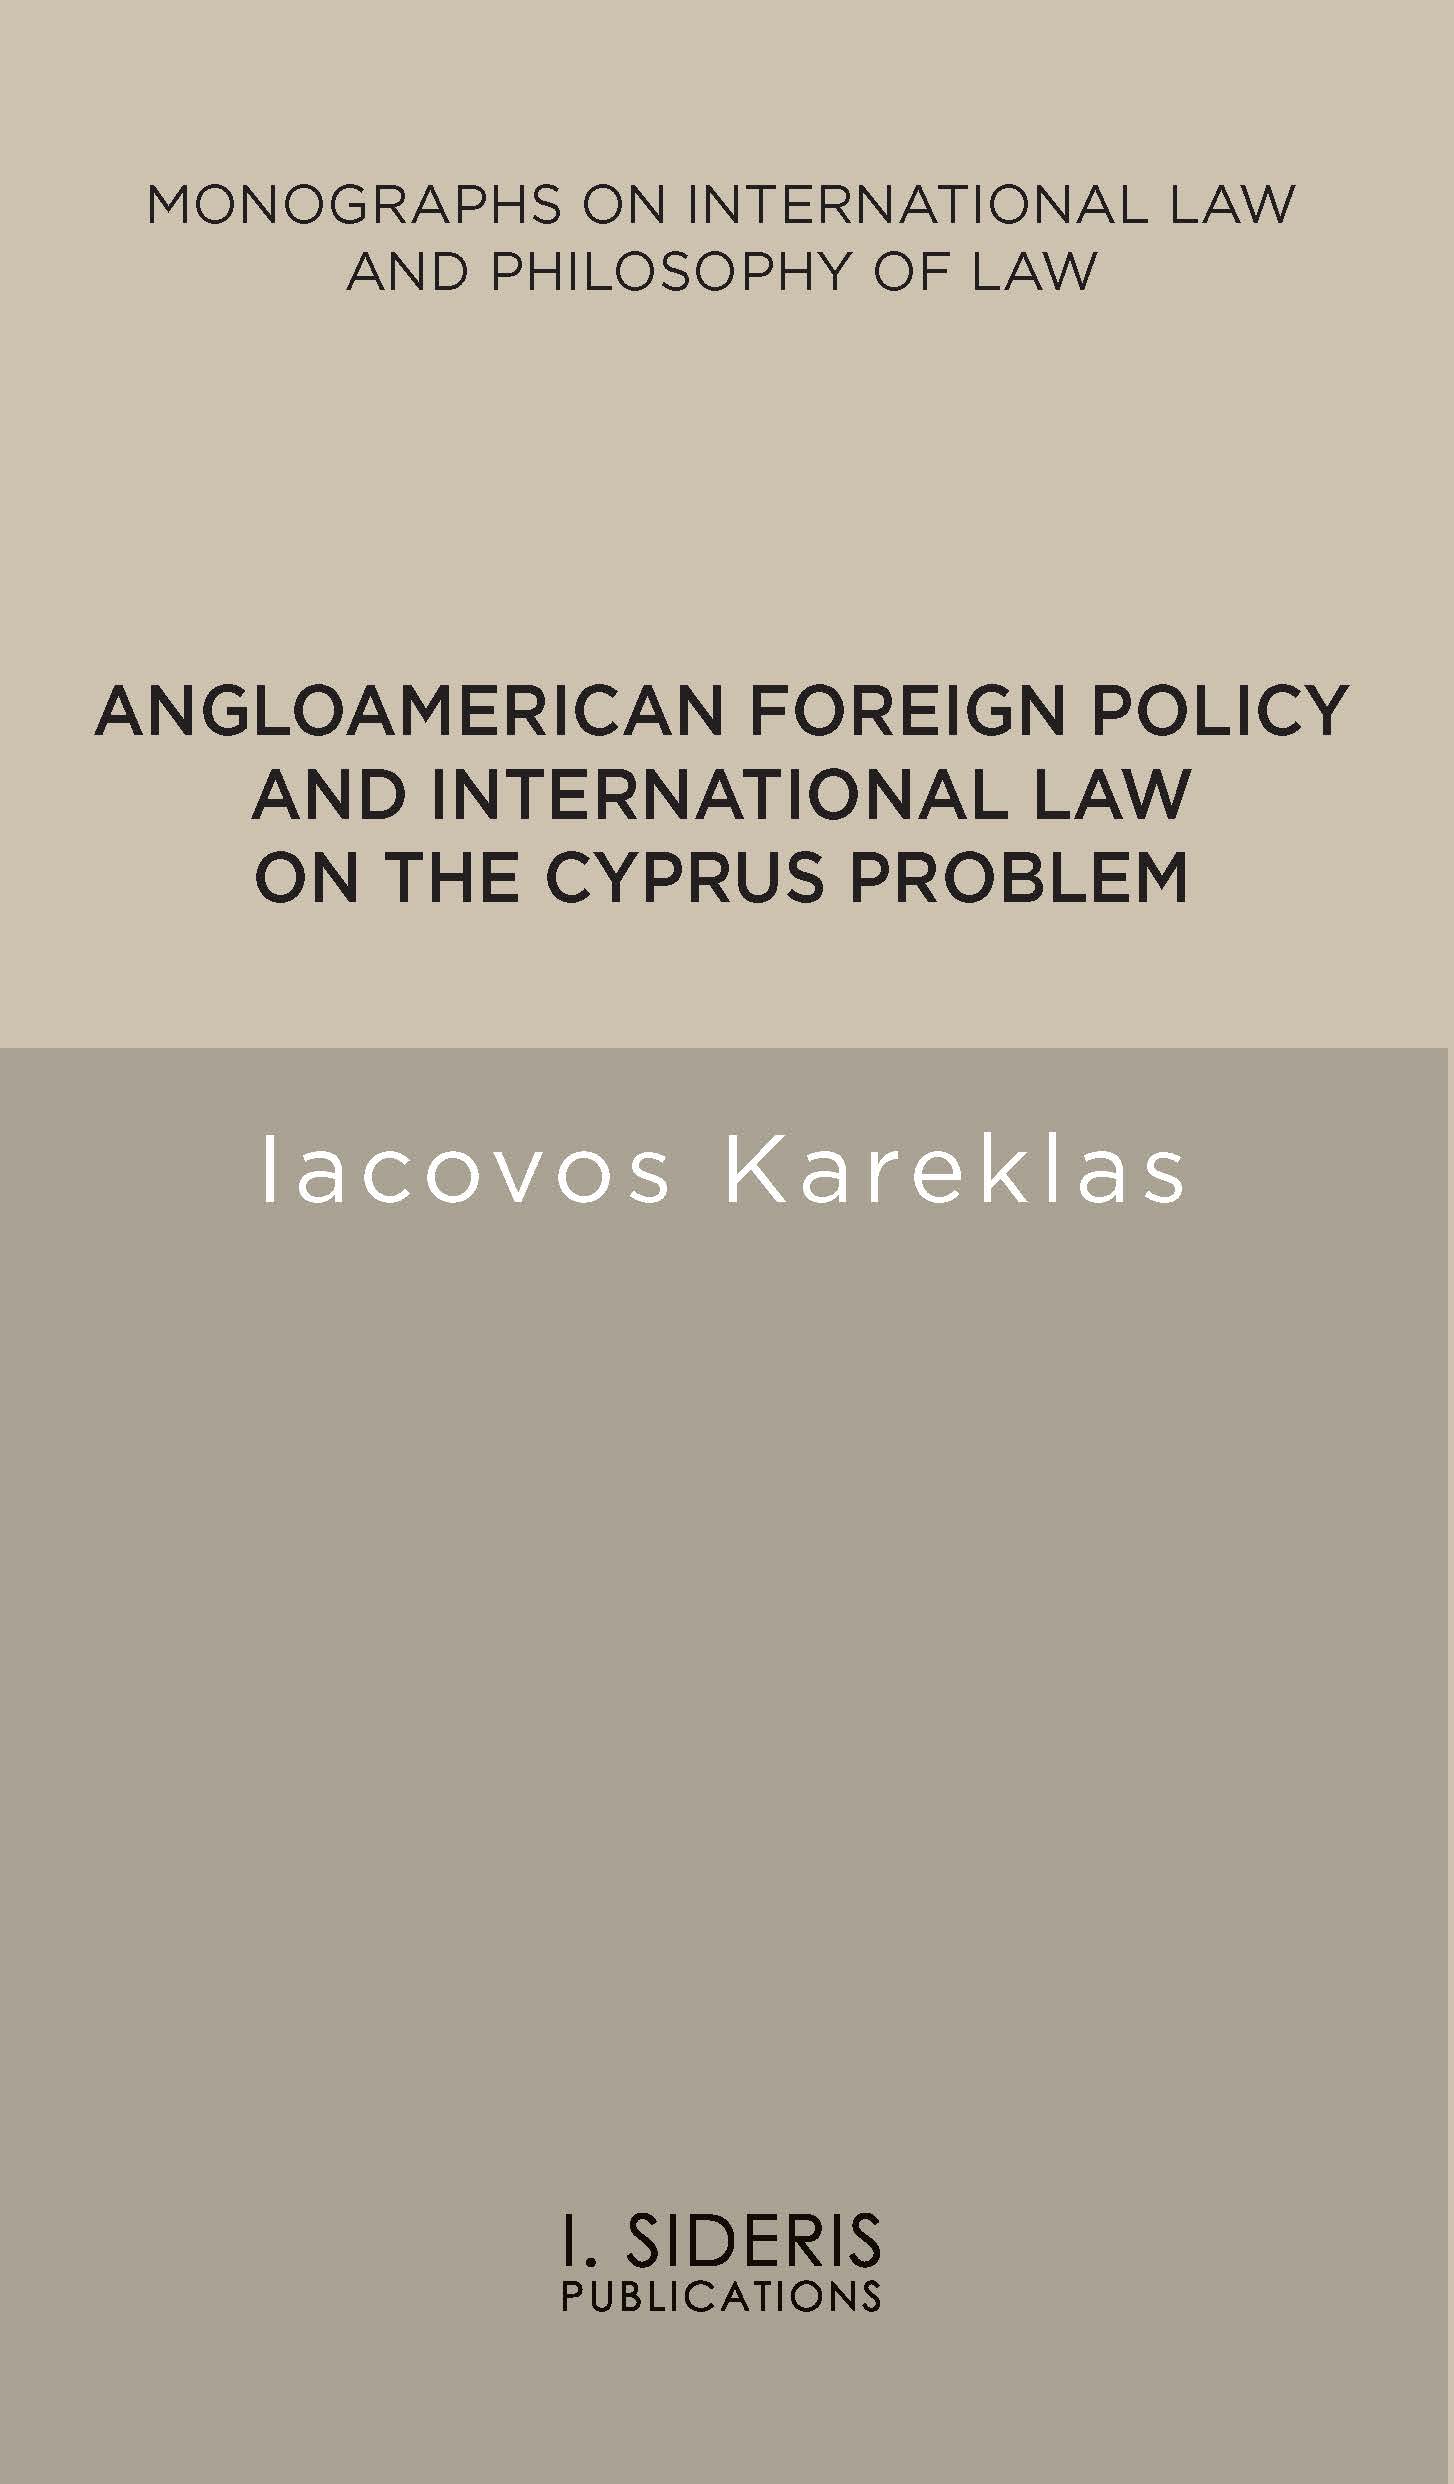 Angloamerican foreign policy and international law on the Cyprus problem